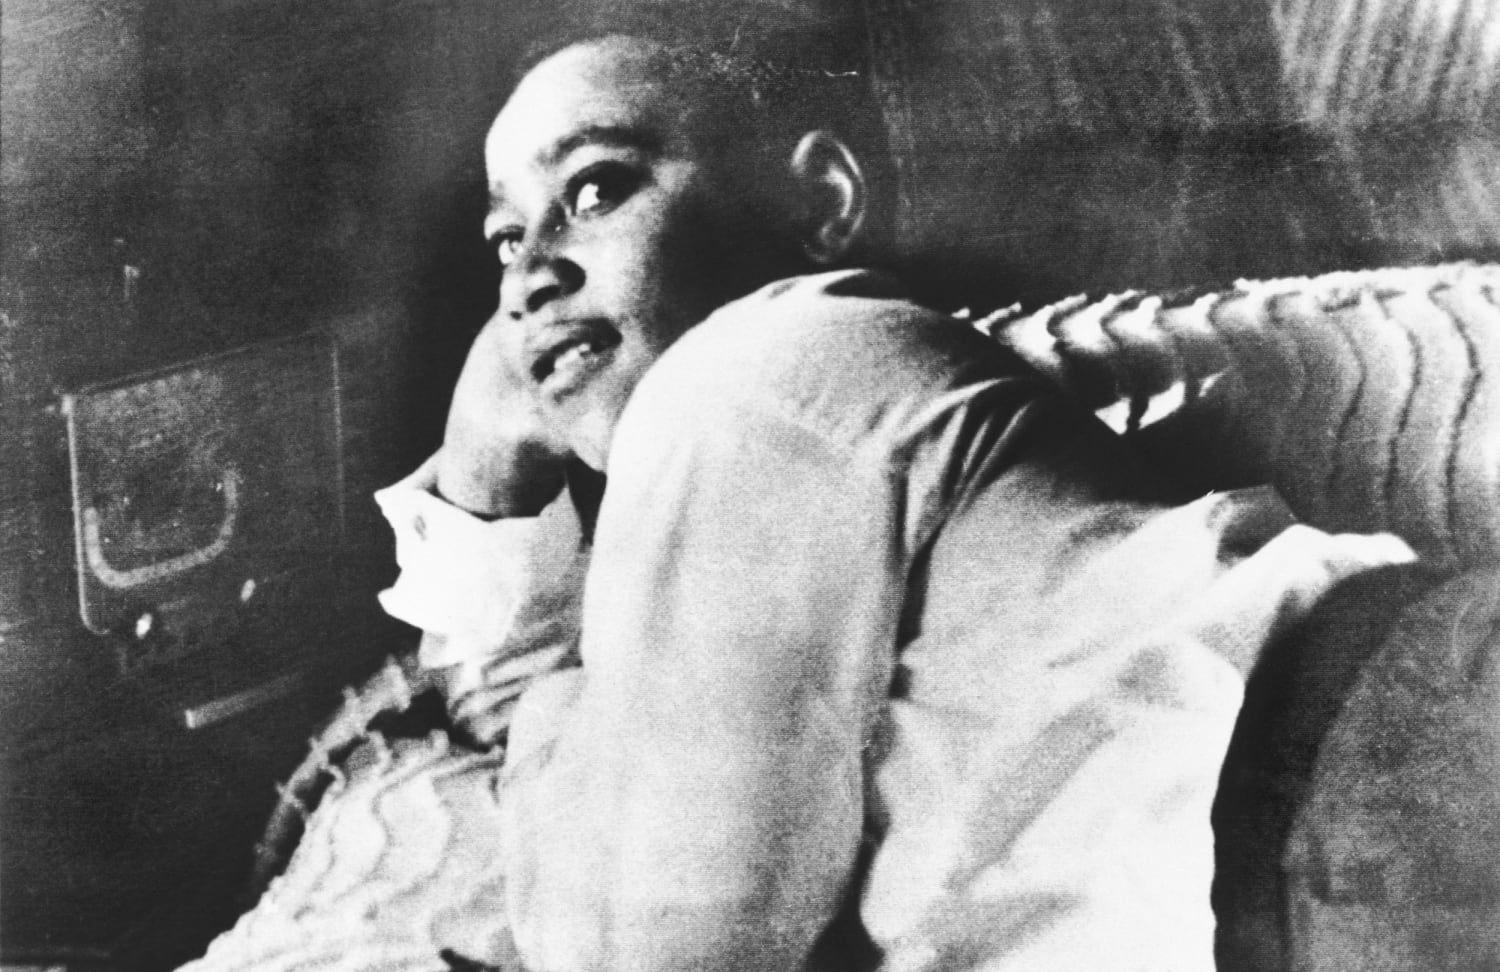 Emmett Till had a last chance at justice. And we wasted it.